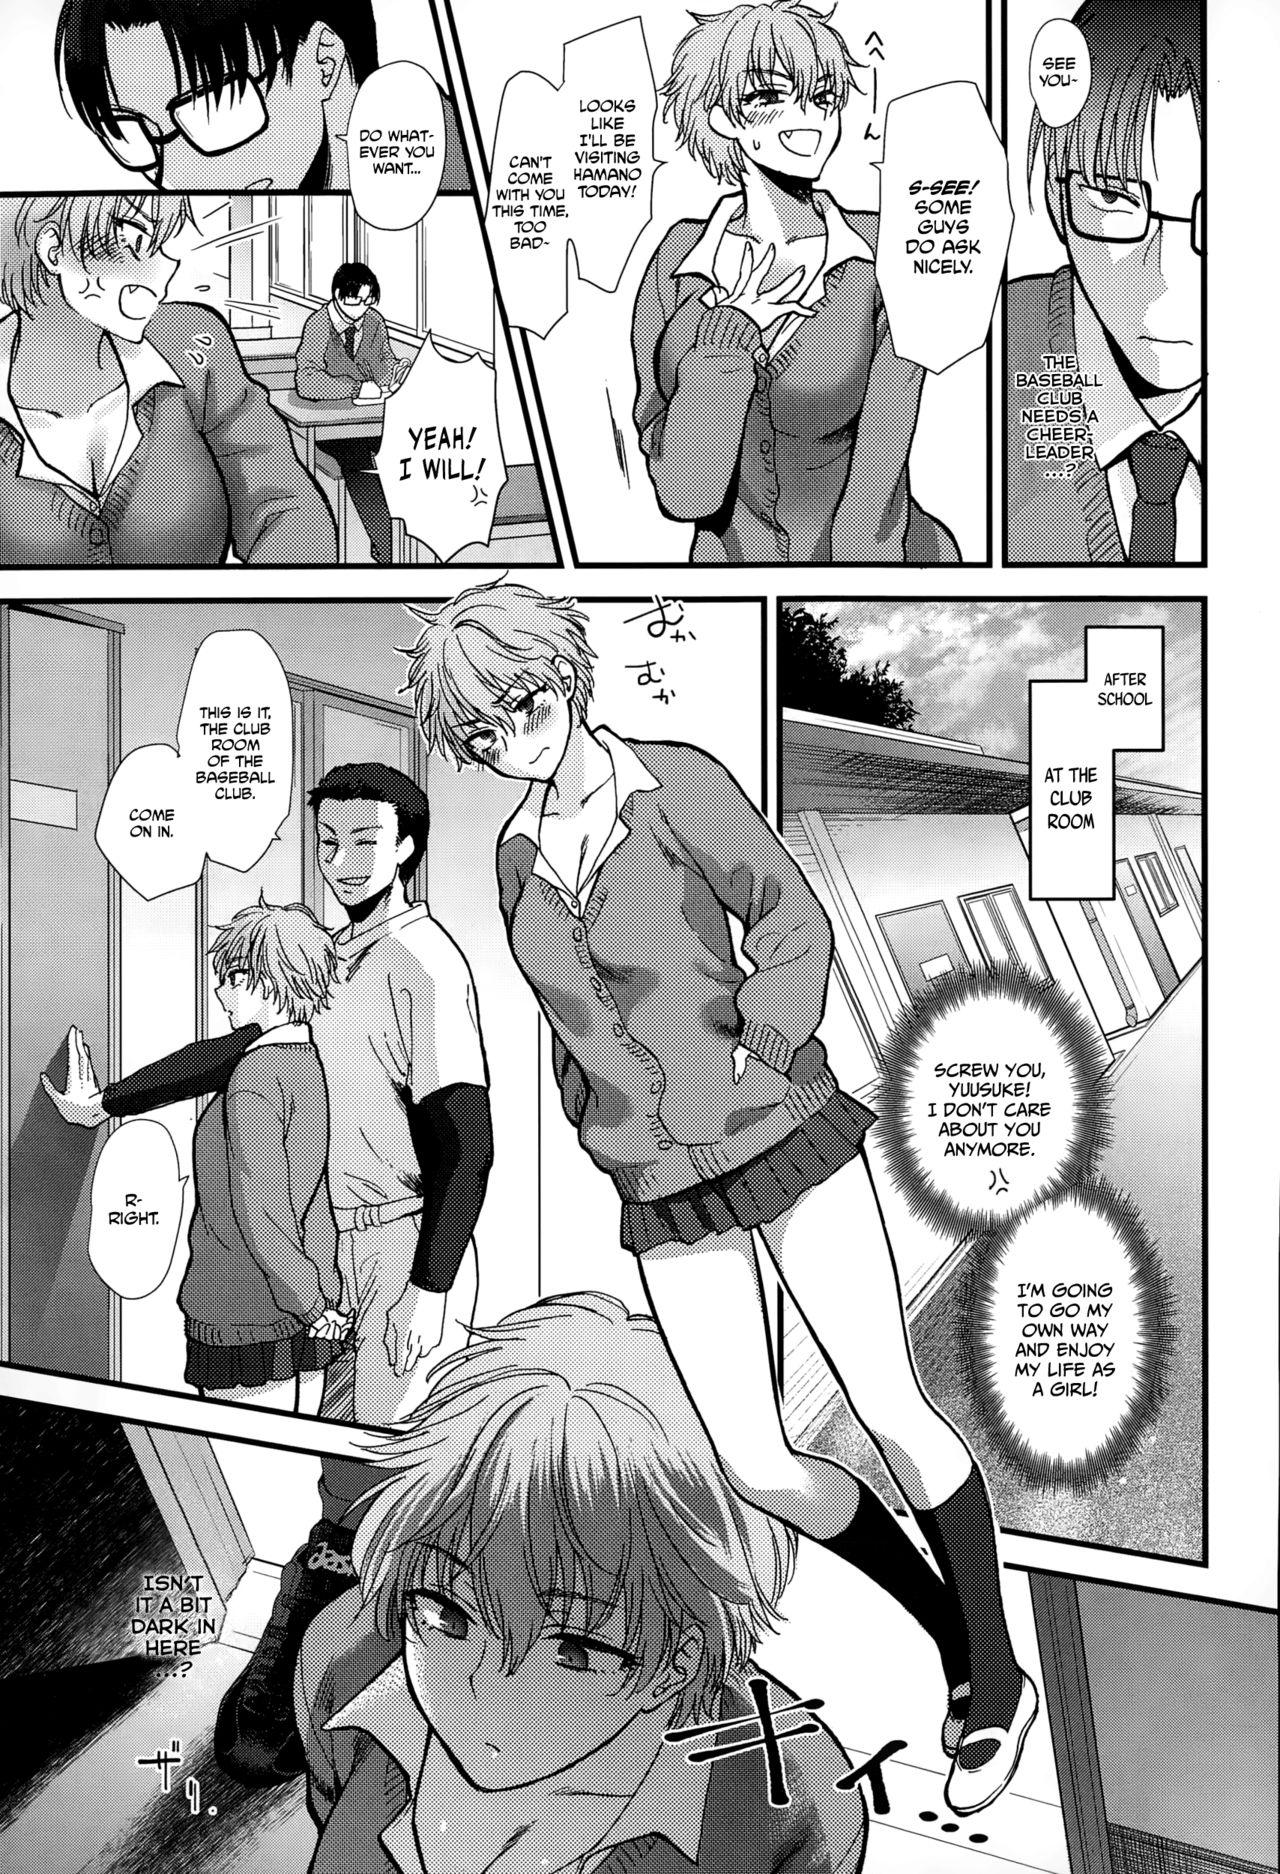 Euro Porn Shinyuu Affection | Best Friend Affection Hairypussy - Page 7